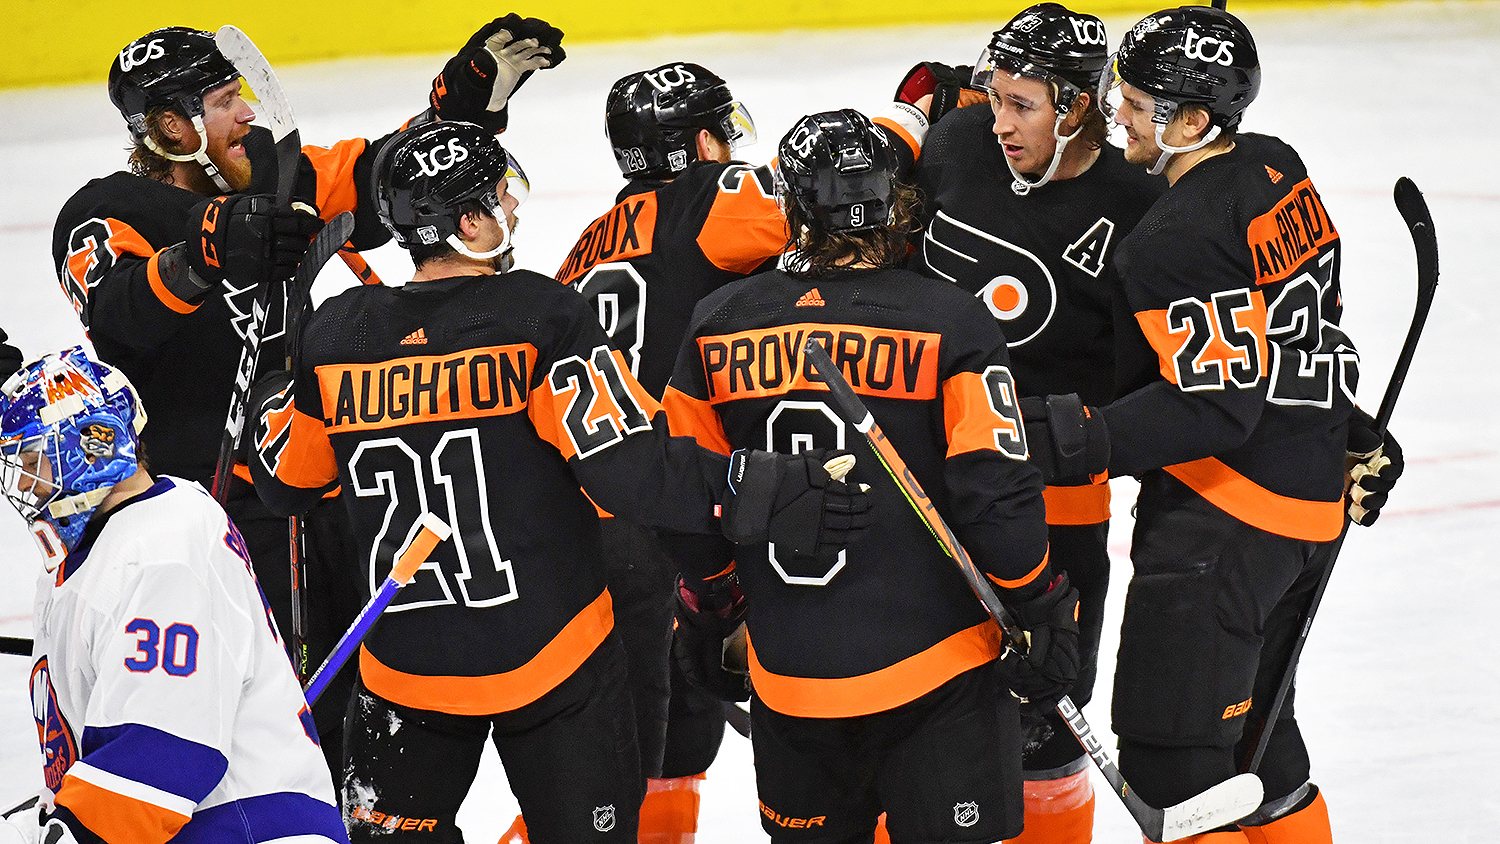 More OT-dramatic as Flyers sweep islanders for best start of ten games since 2002-03